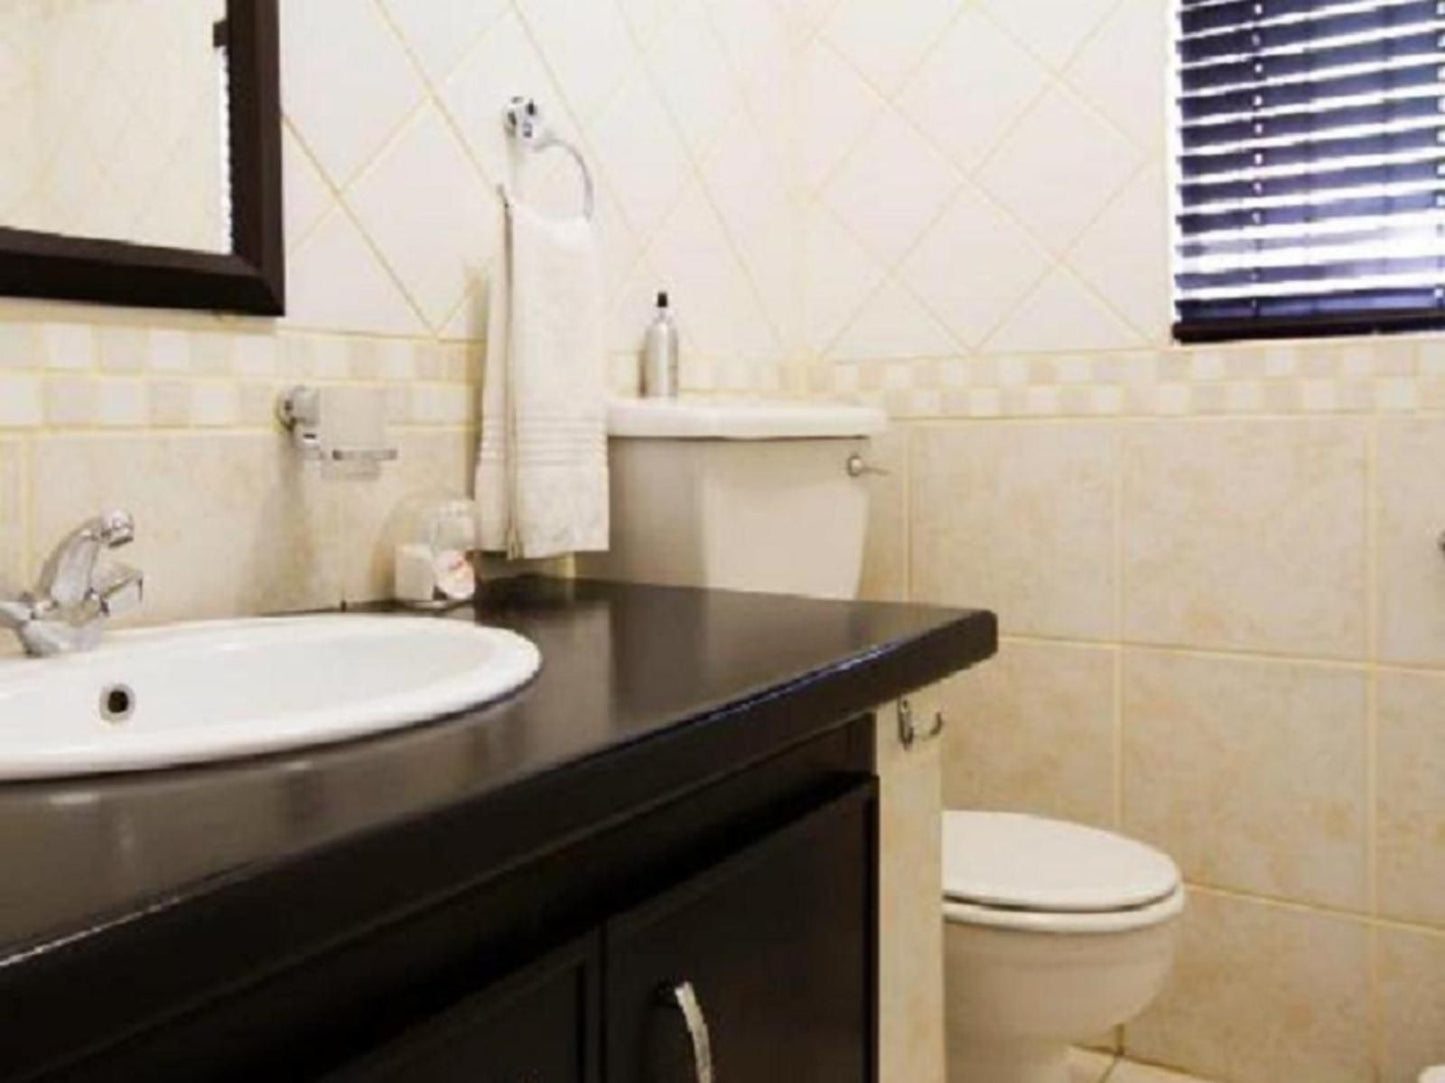 The Villa Guest House Bayswater Bloemfontein Free State South Africa Bathroom